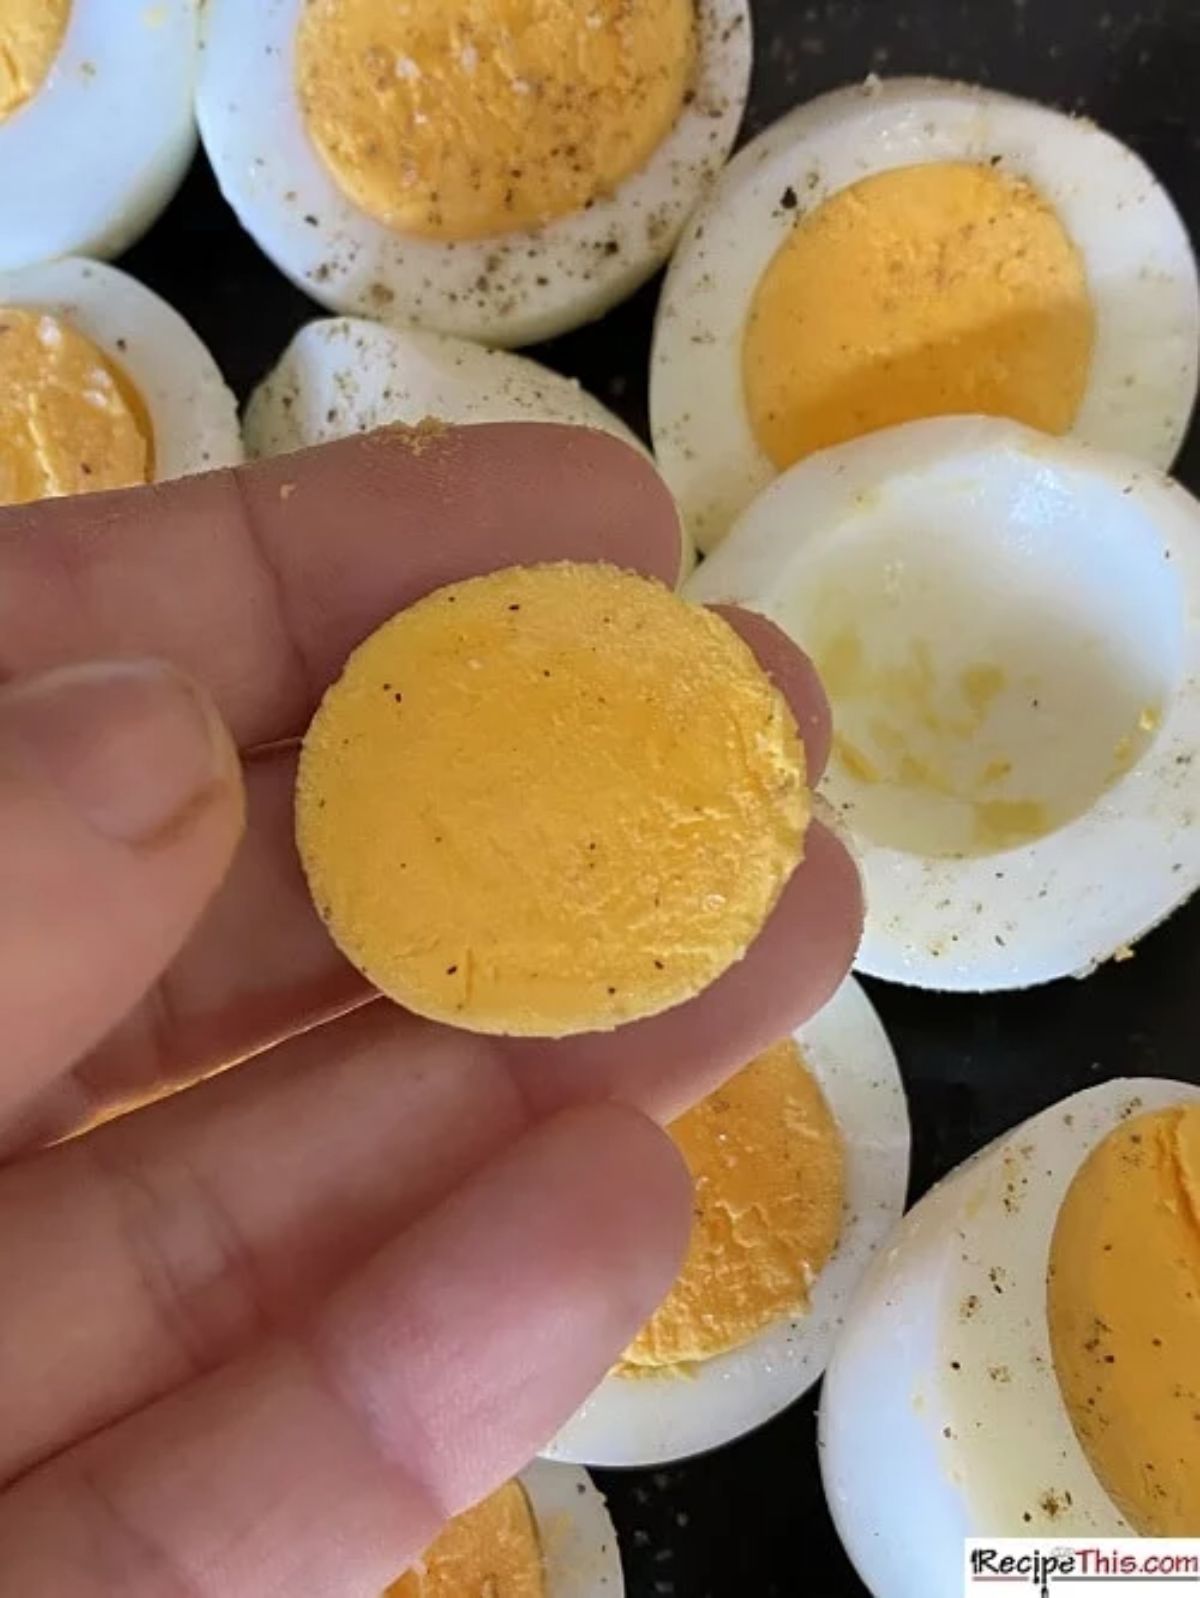 A hand picks the yolk of a hard boiled egg from a pile of halved hard boiled eggs